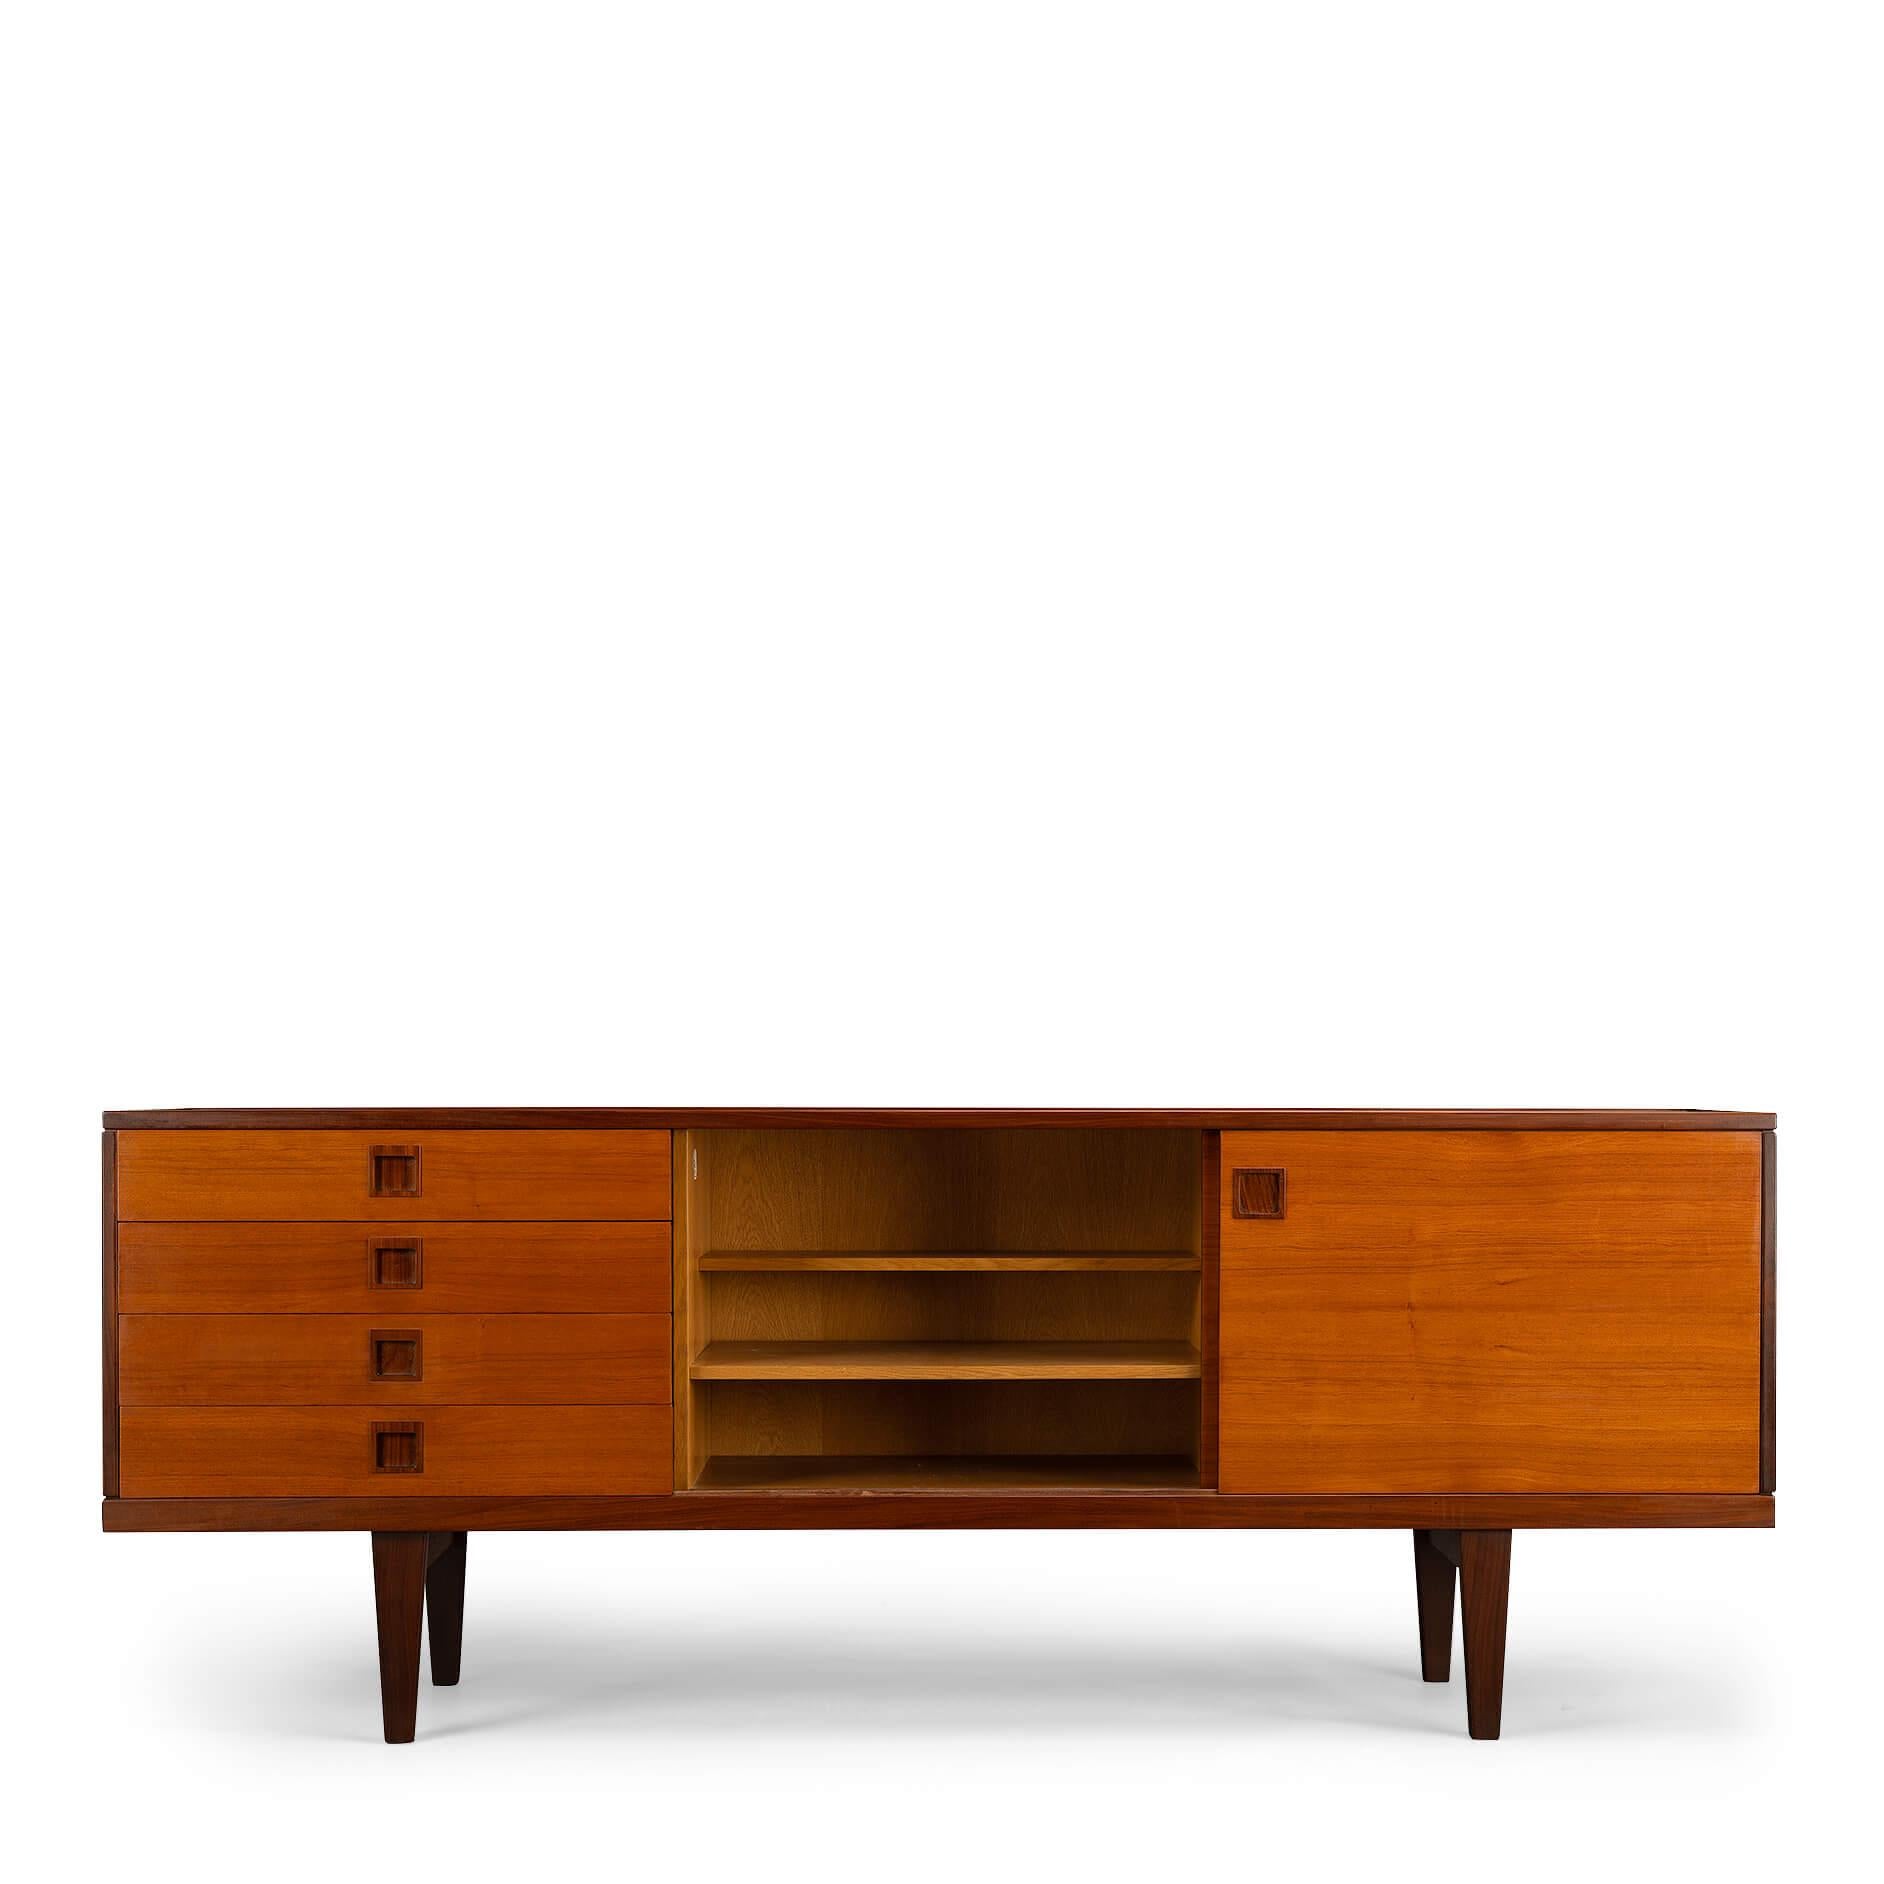 Danish Design sideboard
Mouthwatering teak beauty mid century design buffet by Niels O. Møller for the JL Møllers Denmark. This piece has a lot going for it, just note the raised edges of the top in solid teak. The front of the cabinet is in a